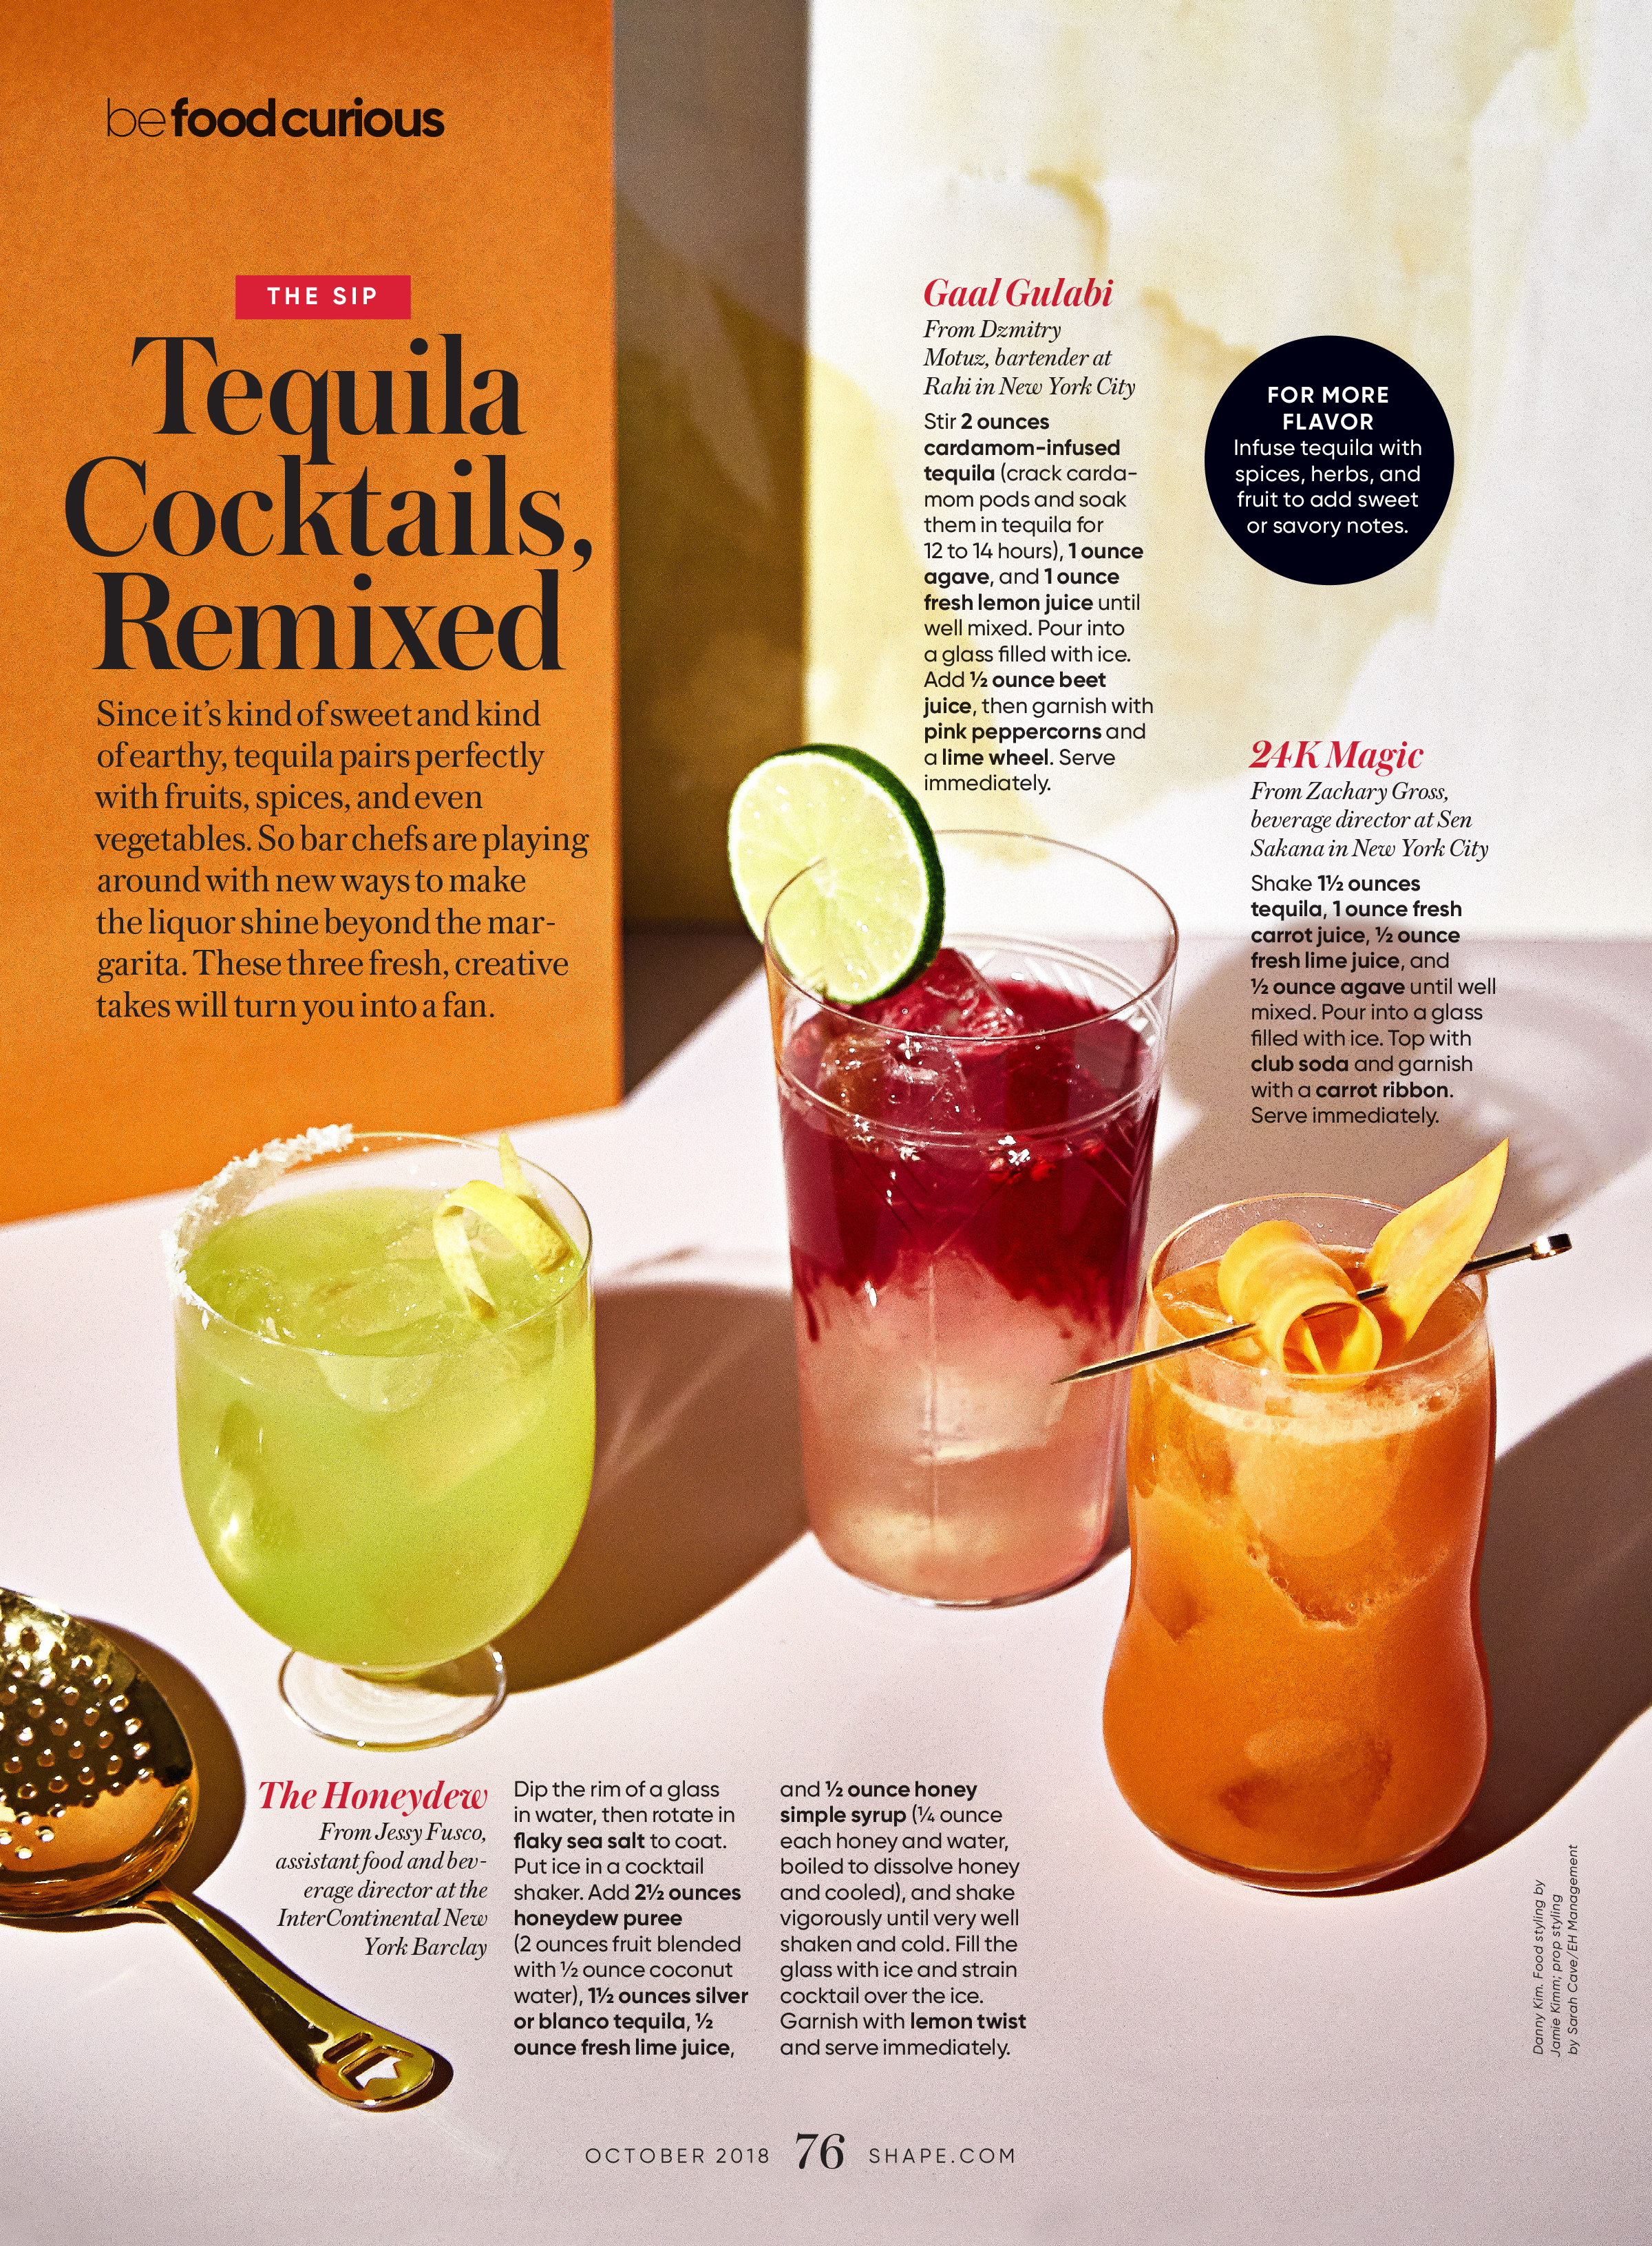 Tequila Cocktails, Remixed; October 2018